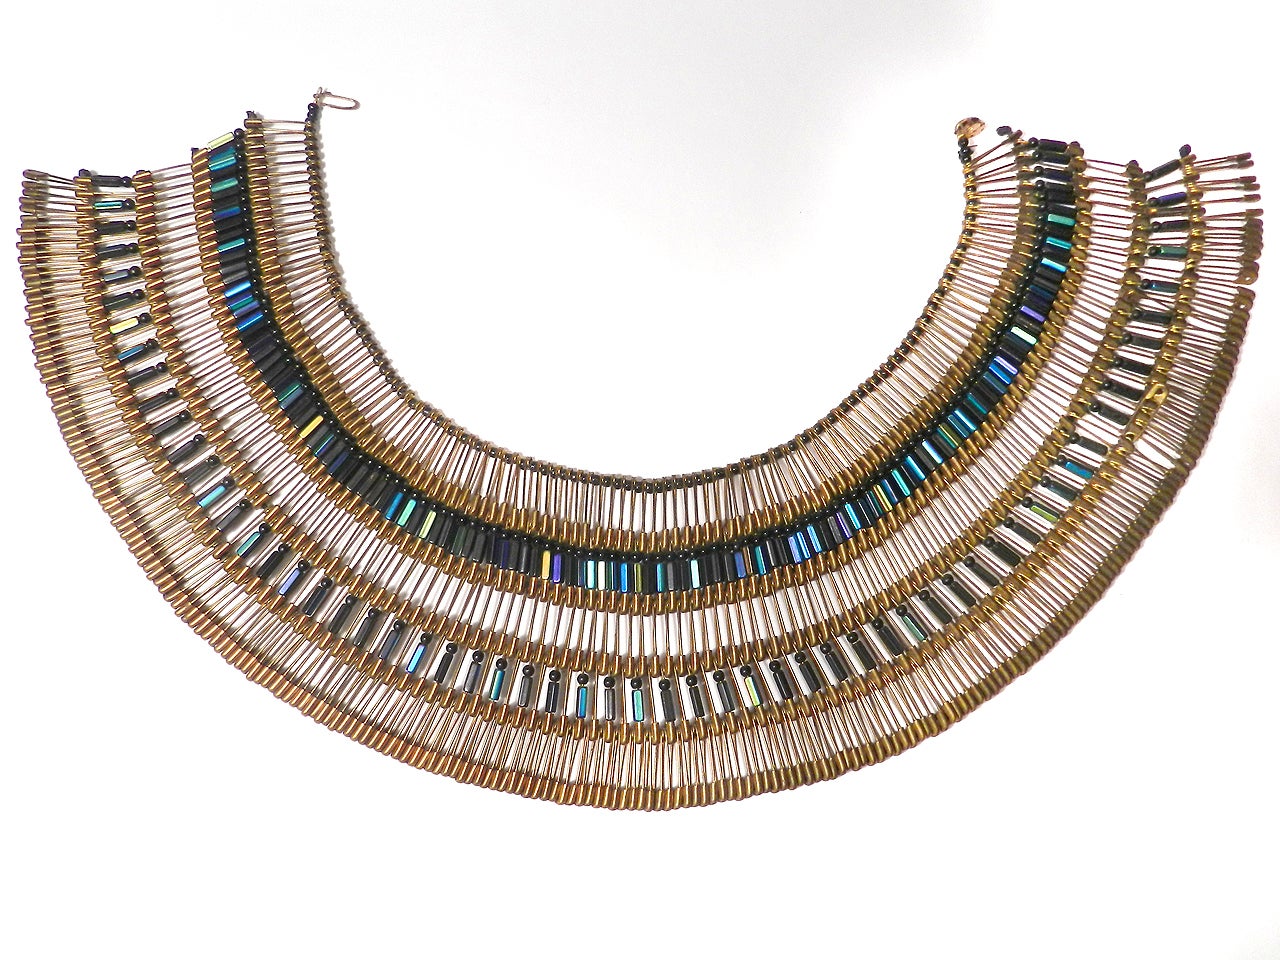 Folk Art Cleopatra Necklace - Made From 750 Safety Pins